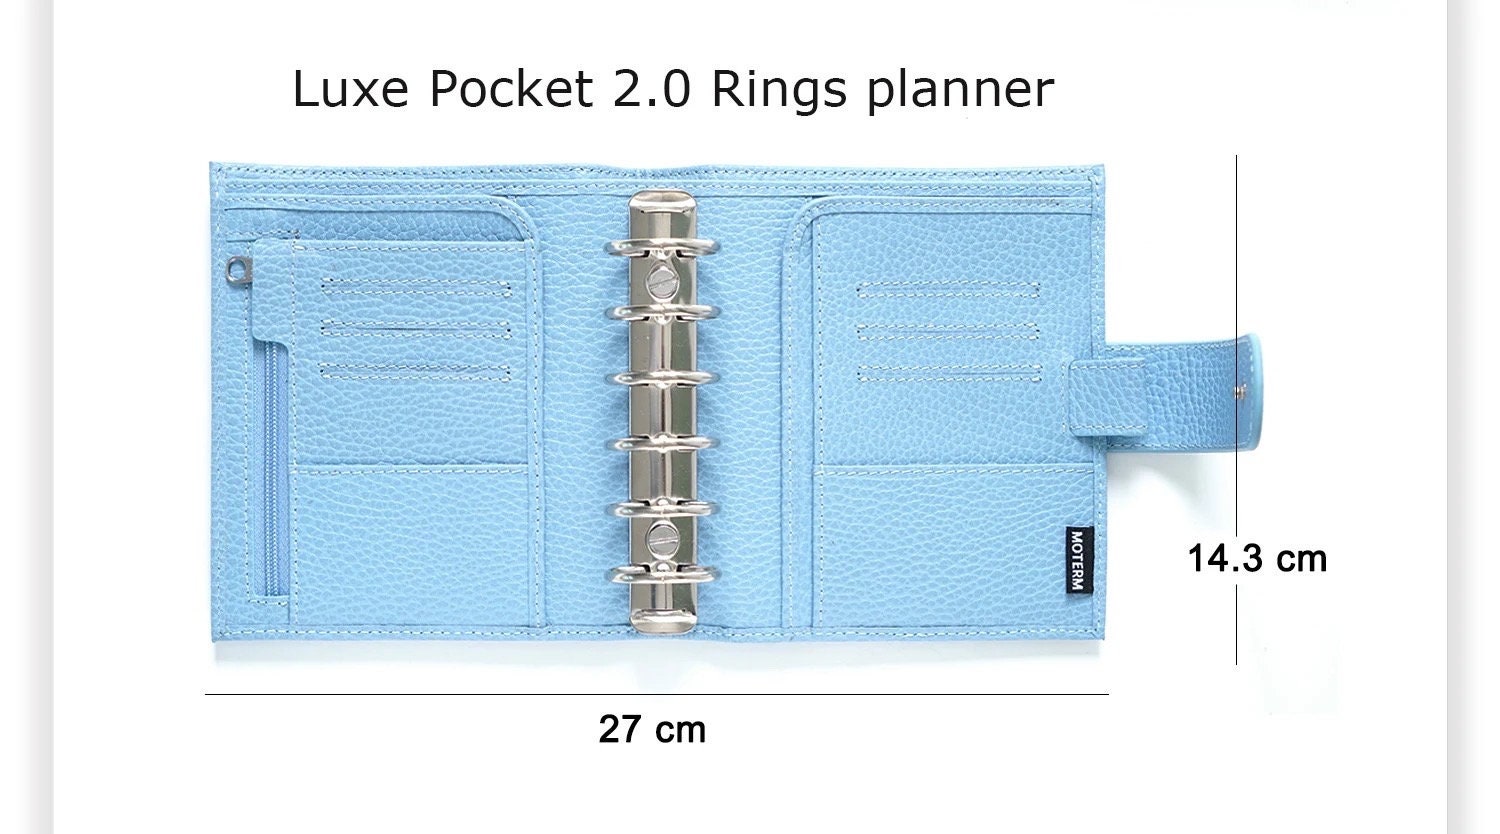  Moterm Pocket Luxe Rings Planner - Genuine Leather Binder  Organizer (30mm Ring, Pebbled-Light Blue) : Office Products